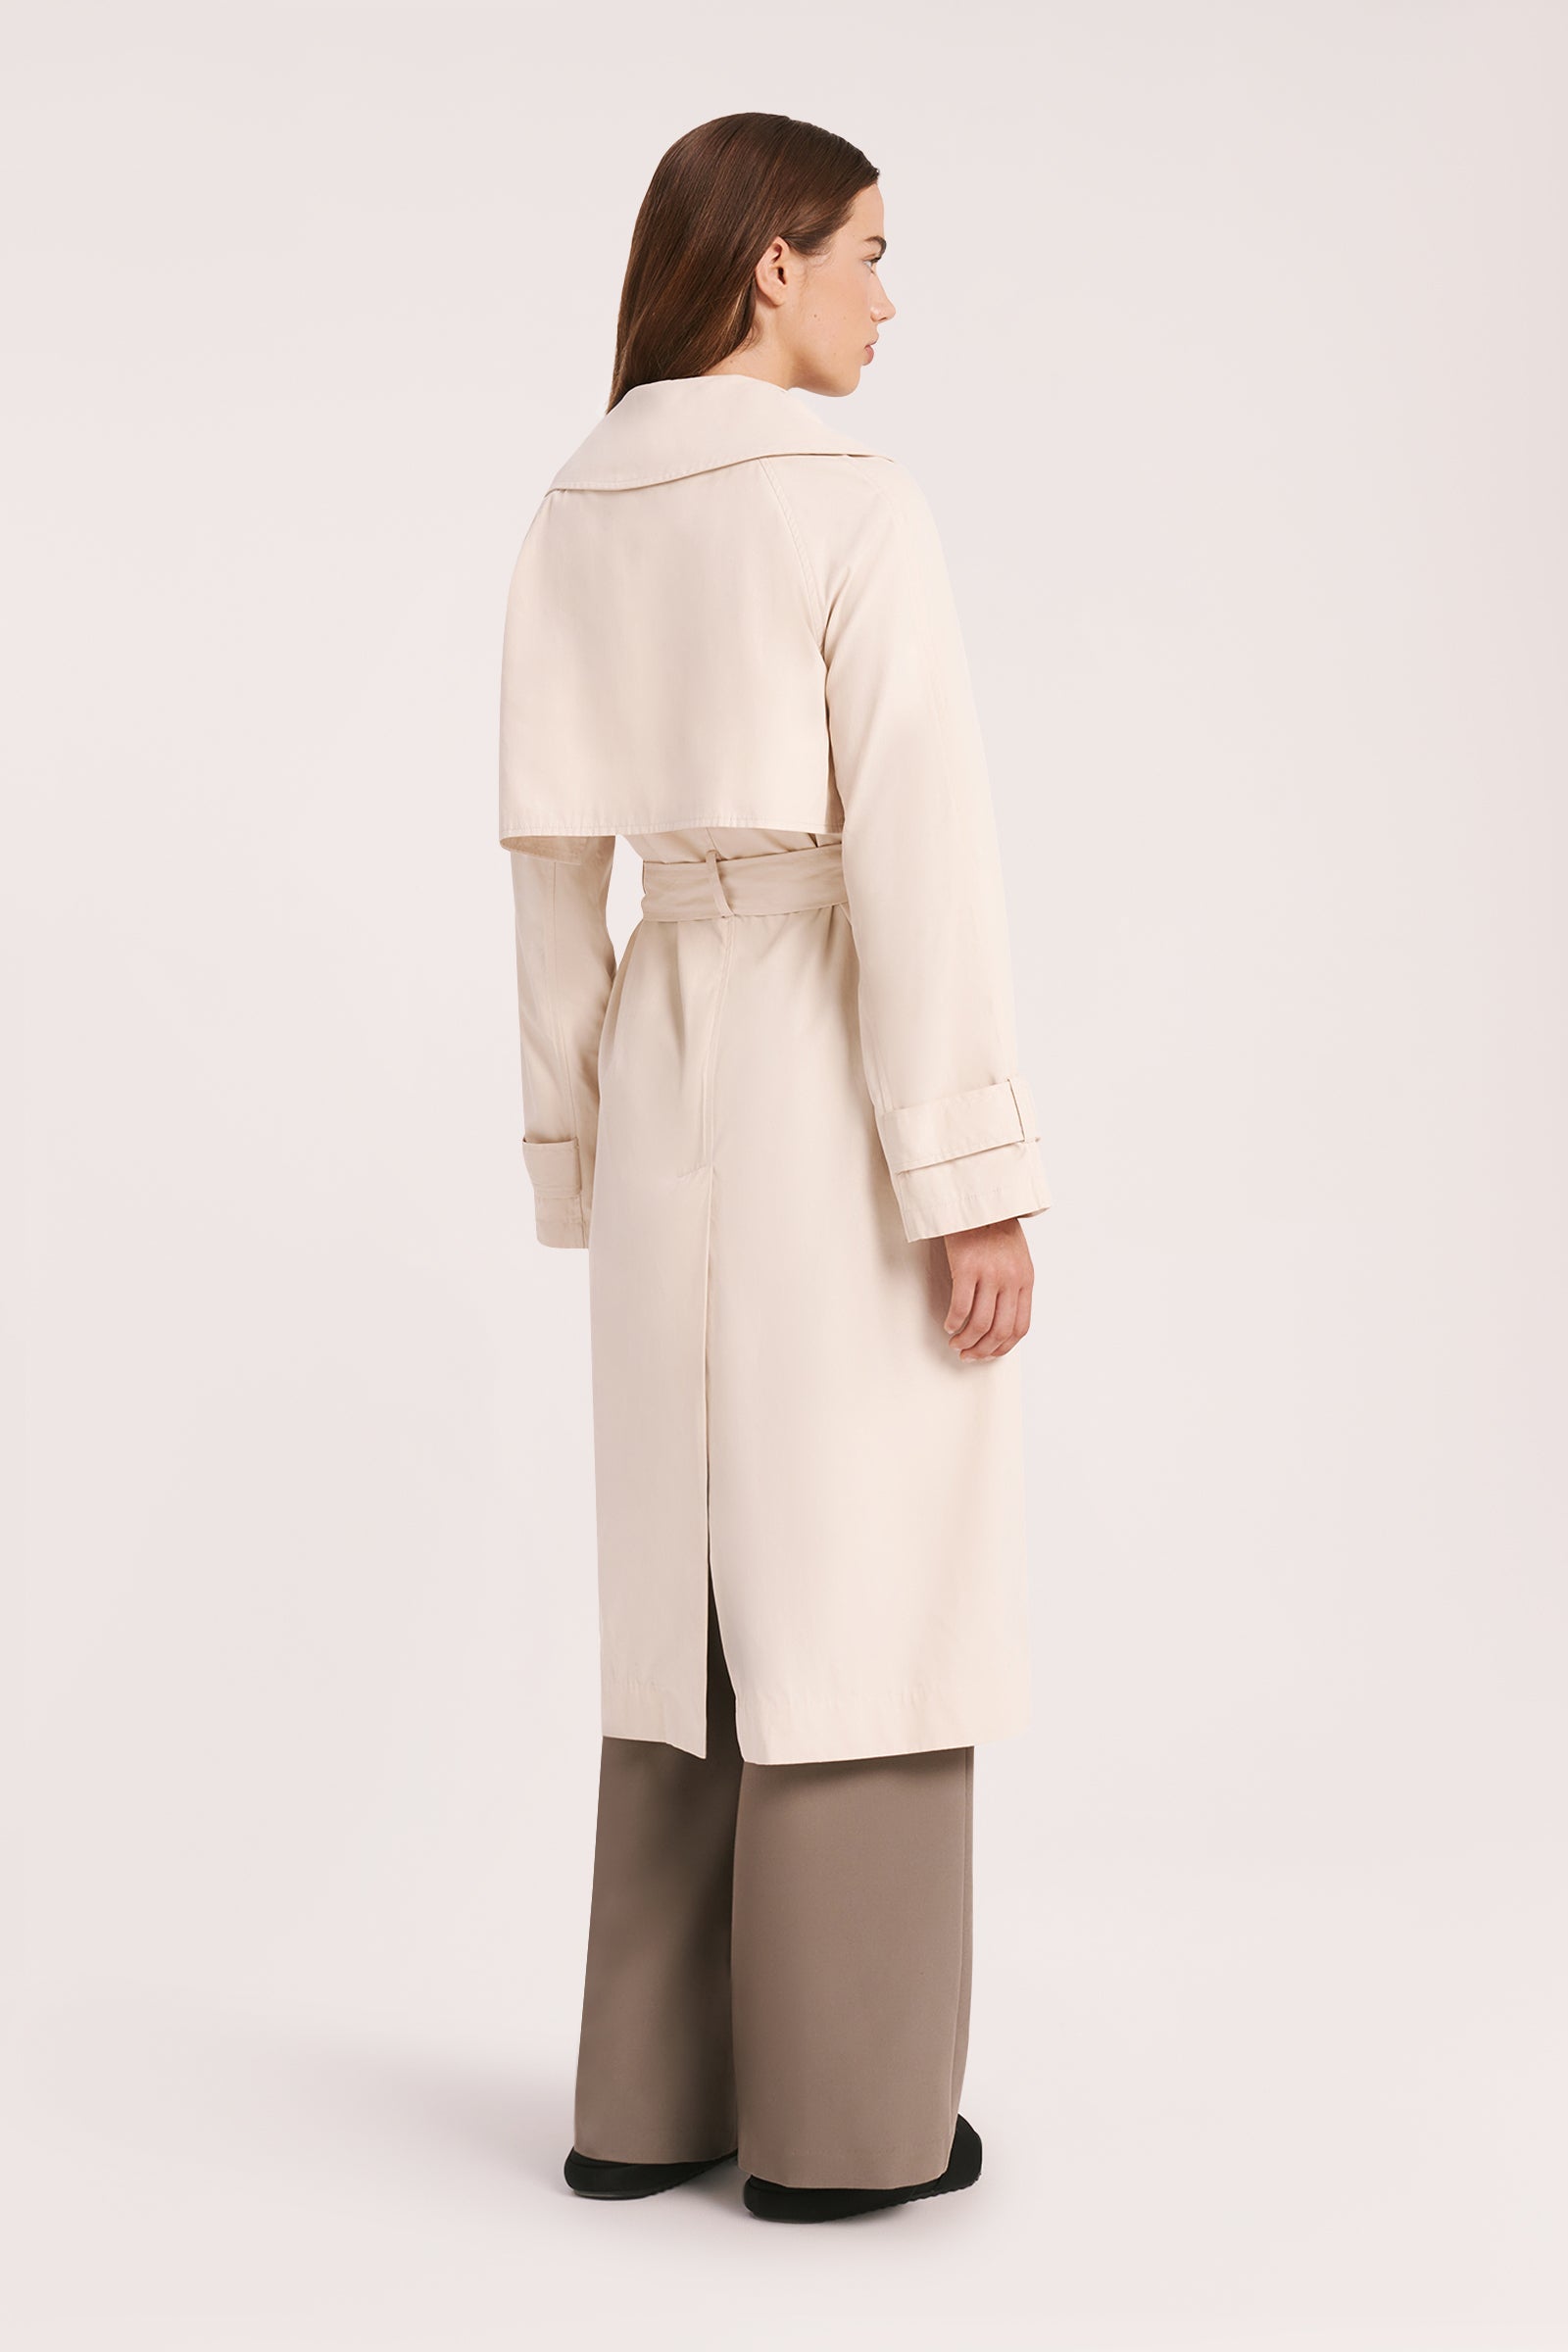 Nude Lucy Odyssey Trench Coat Coat in White Cloud